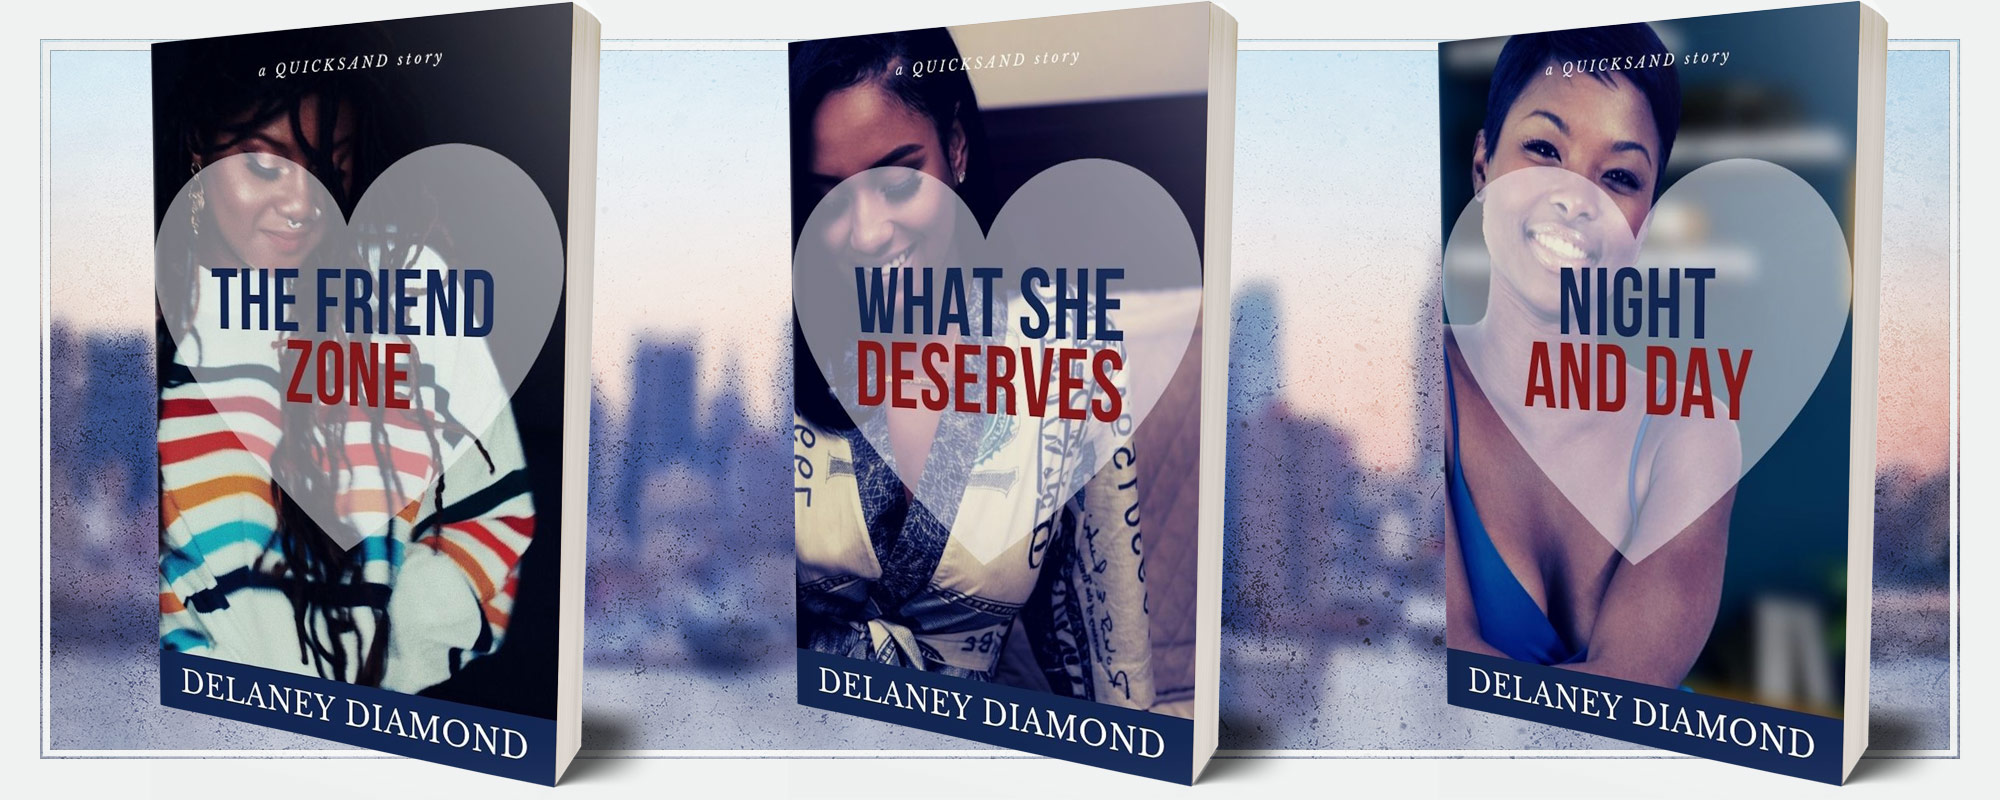 The quicksand series by Delaney Diamond